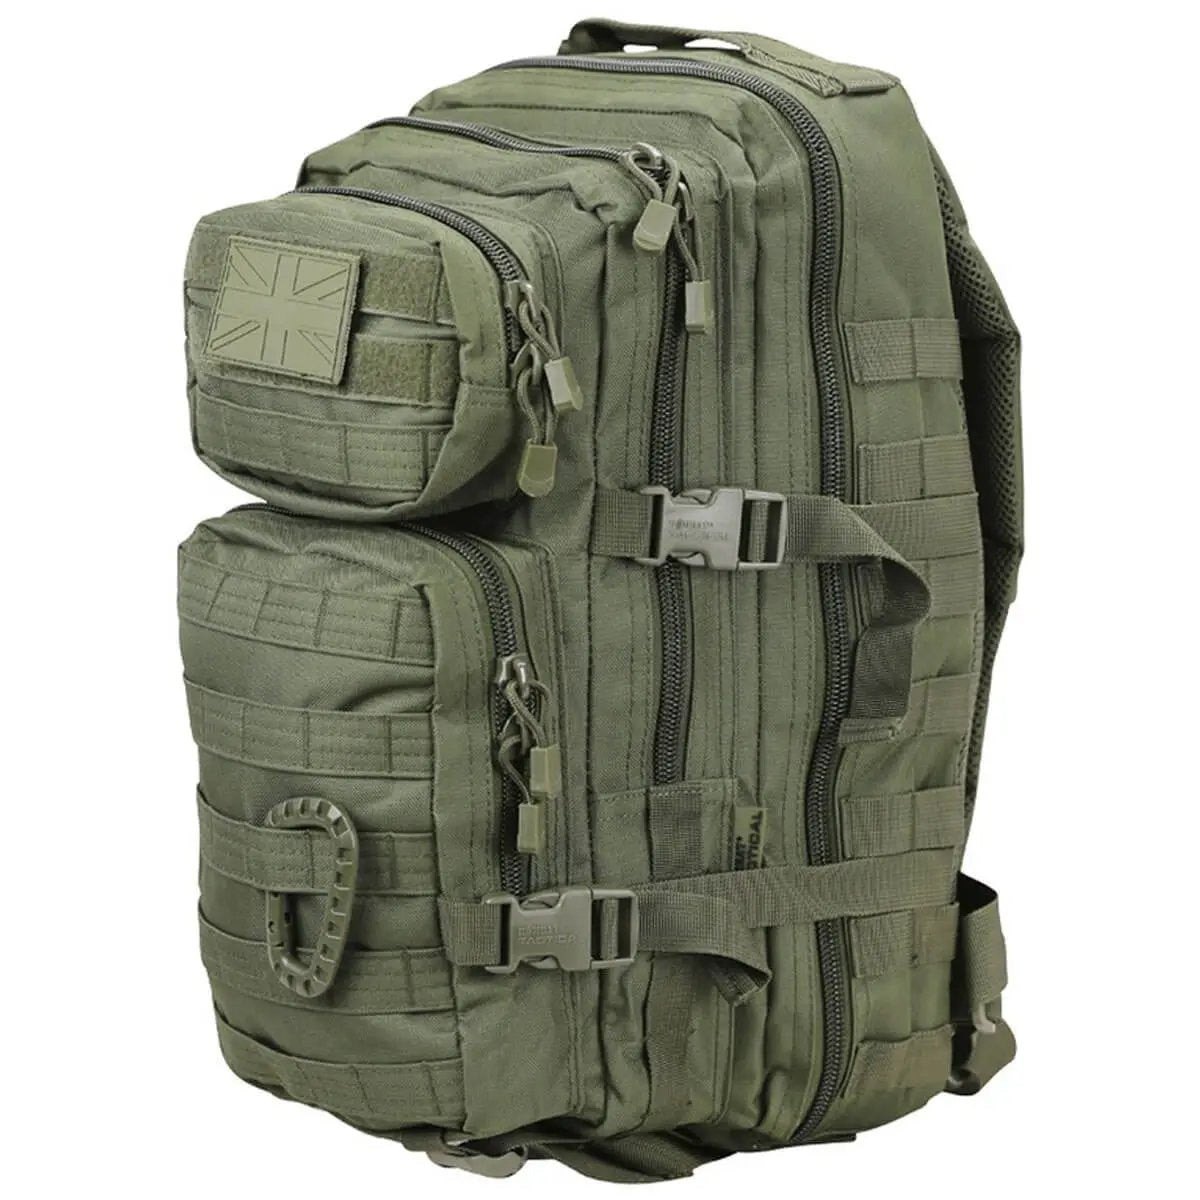 Military Backpack Assault Pack Rucksack Tactical US Bag 36L MOLLE Hiking  Coyote